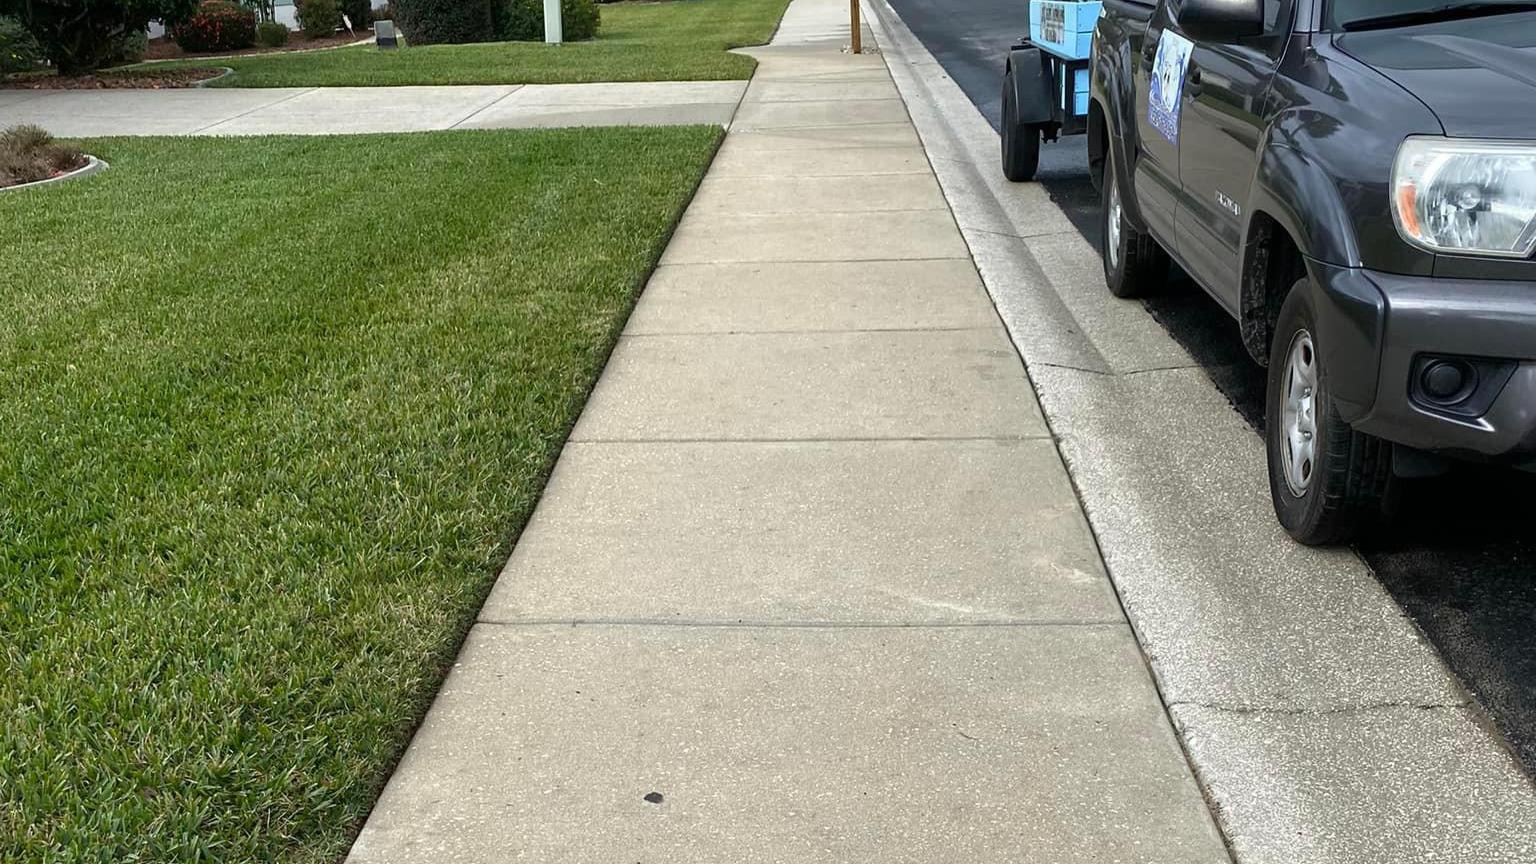 Keep your sidewalks looking clean and inviting with Grego's Power Washing and Property Maintenance sidewalk cleaning services. Our skilled technicians will remove dirt, grease, and other stains, improving the safety and appearance of your sidewalks. With Grego's sidewalk cleaning services, you can ensure a welcoming entrance to your home or business.